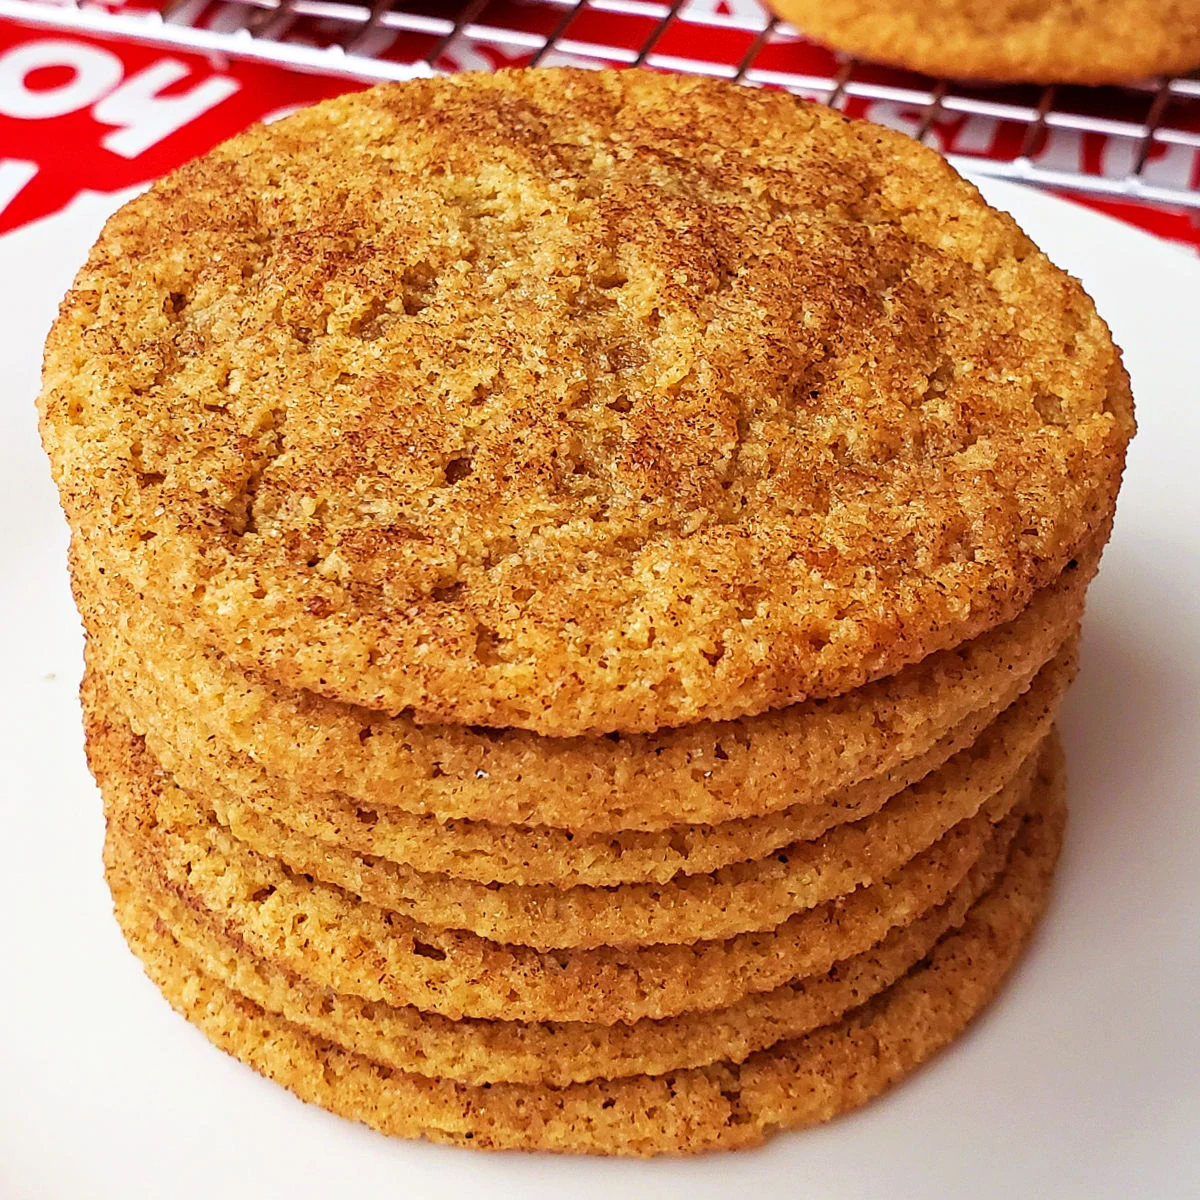 Gluten free snickerdoodles stacked on a white plate